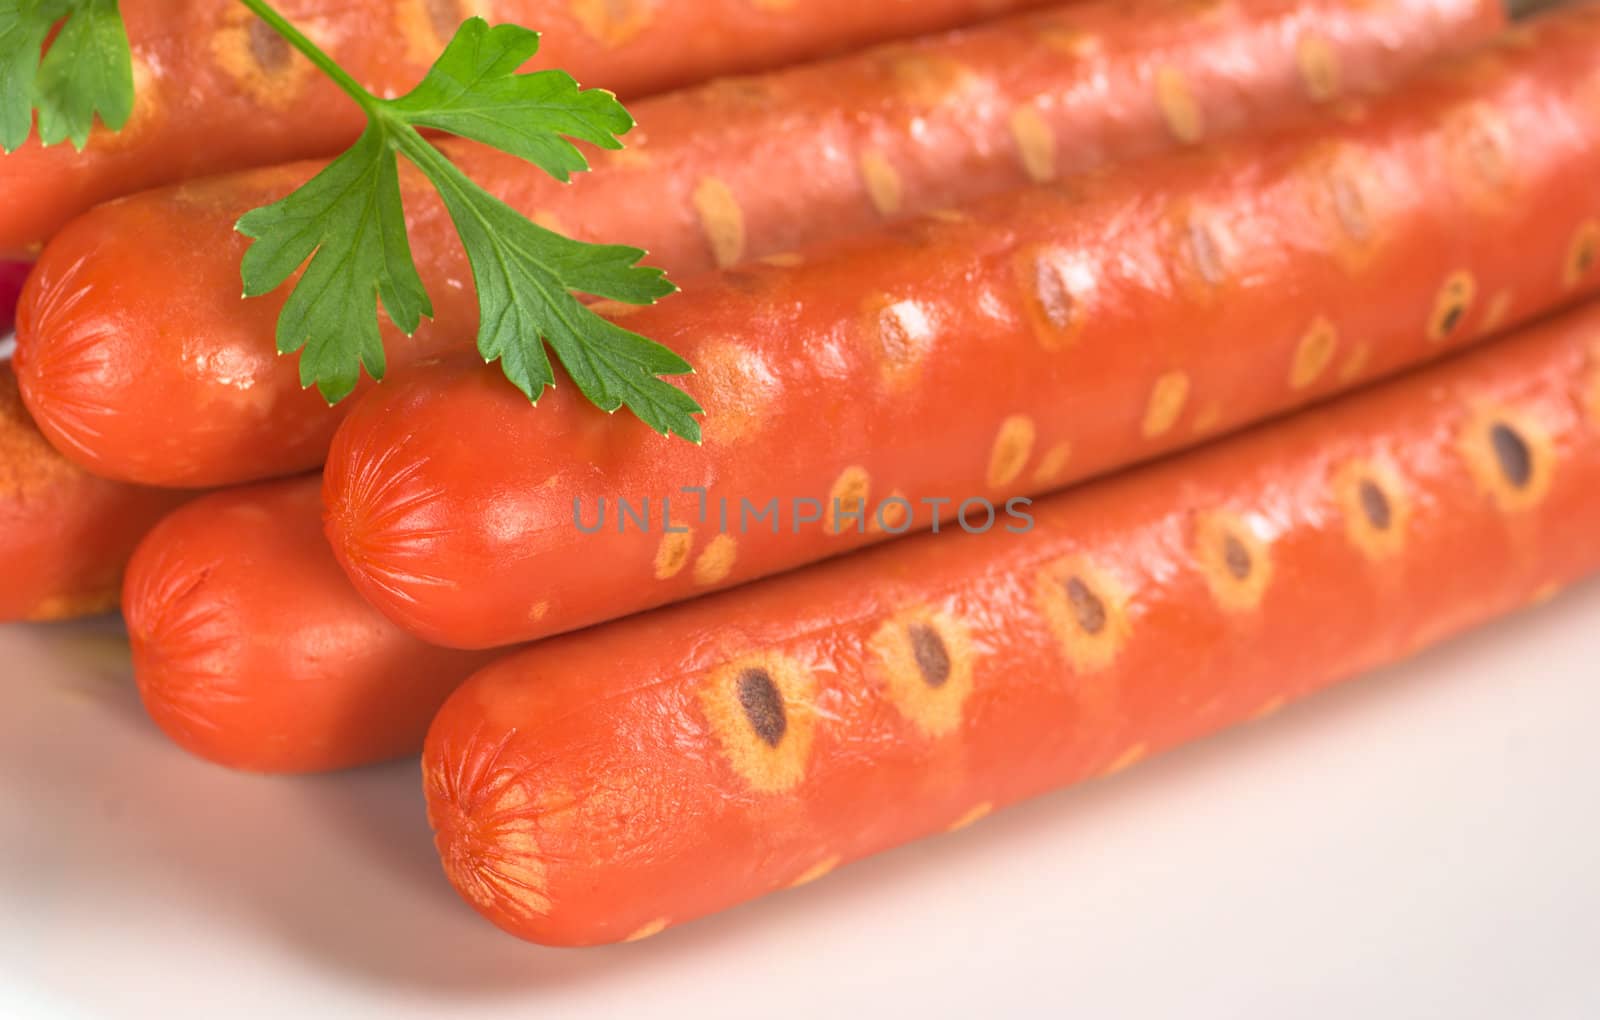 Sausages garnished with a parsley leaf (Selective Focus, Focus on the front of the sausages)